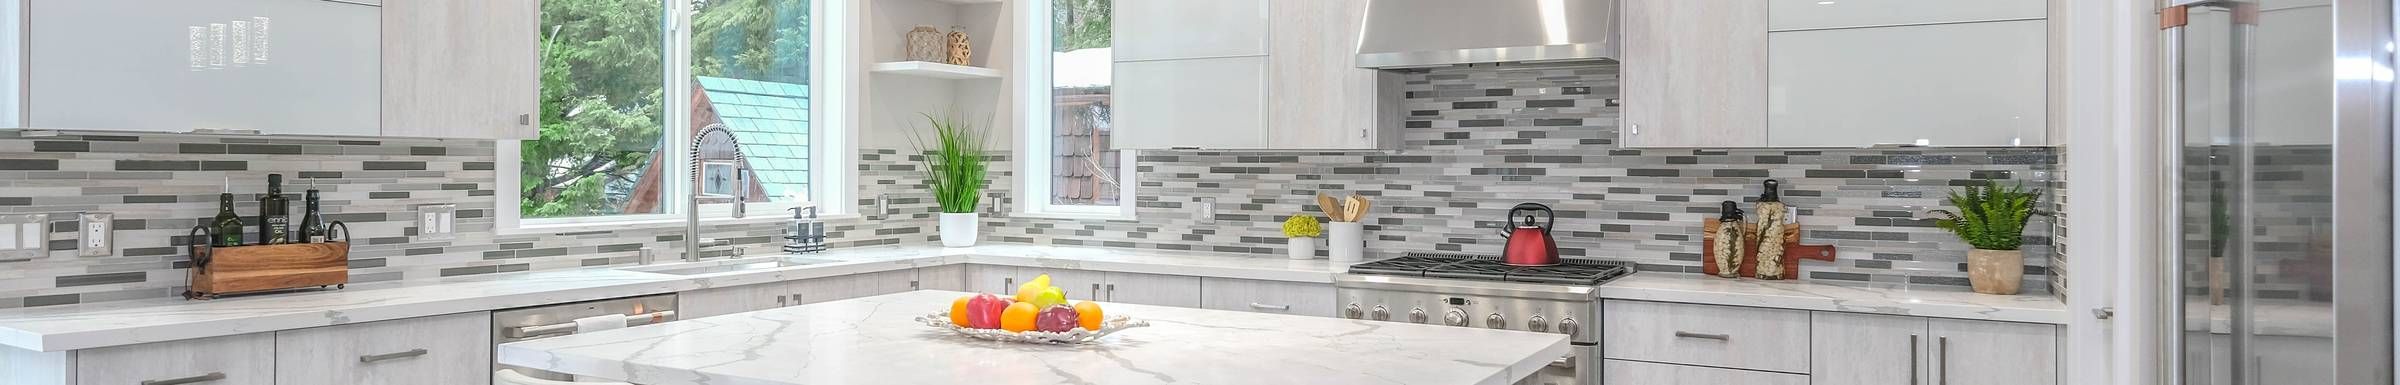 Modern kitchen with stone tile and white cabinets